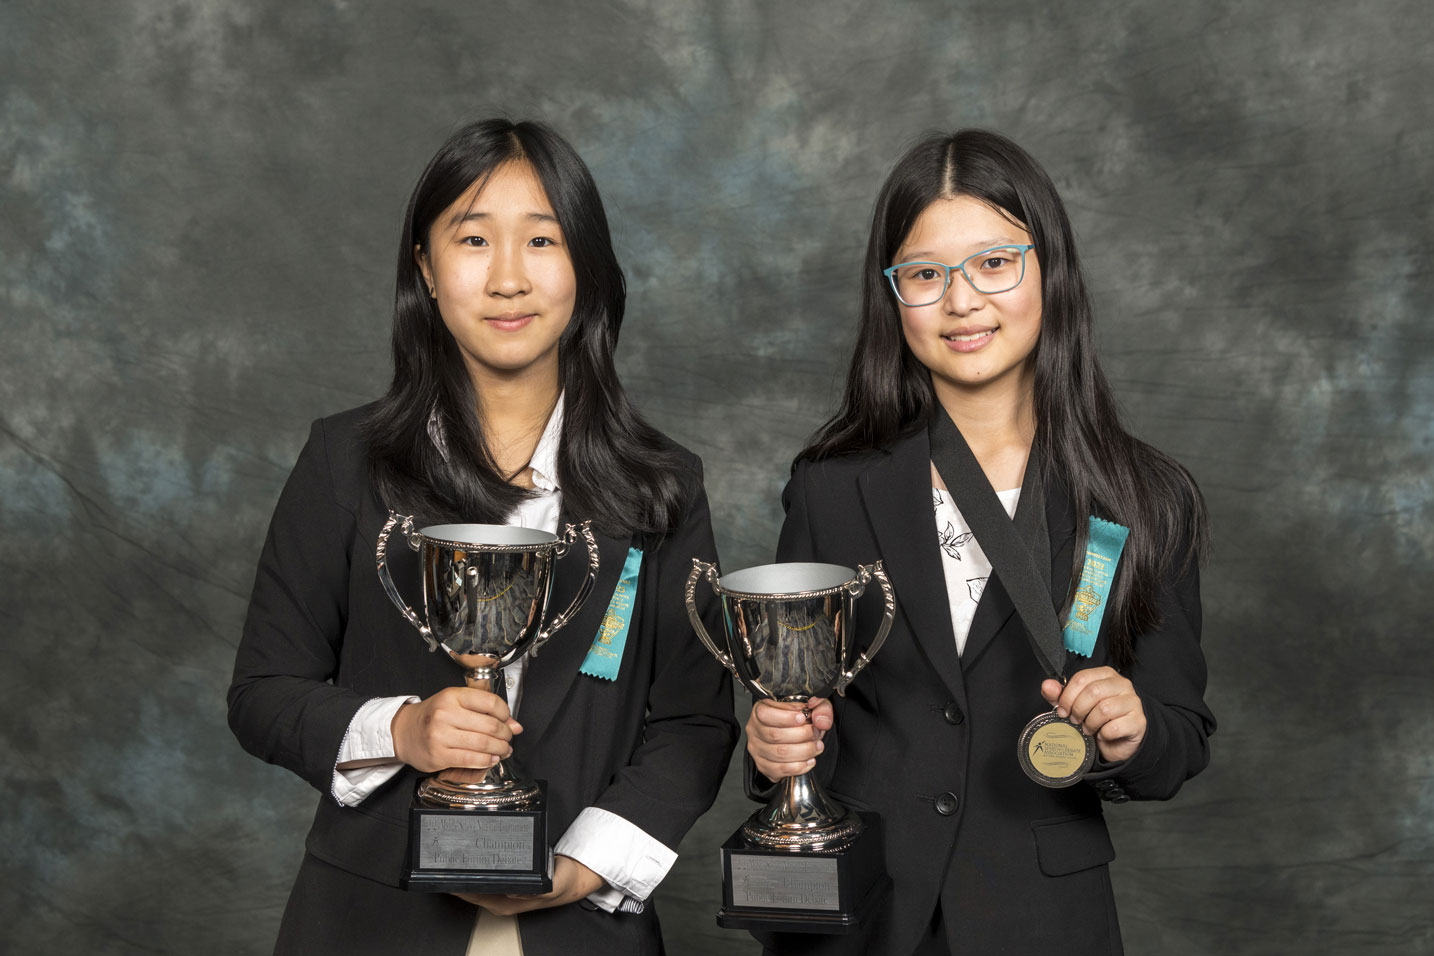 Alyssa Chen and Vivian Chen from Autrey Mill Middle School in Georgia<br />
Coached by Siobhan Connolly